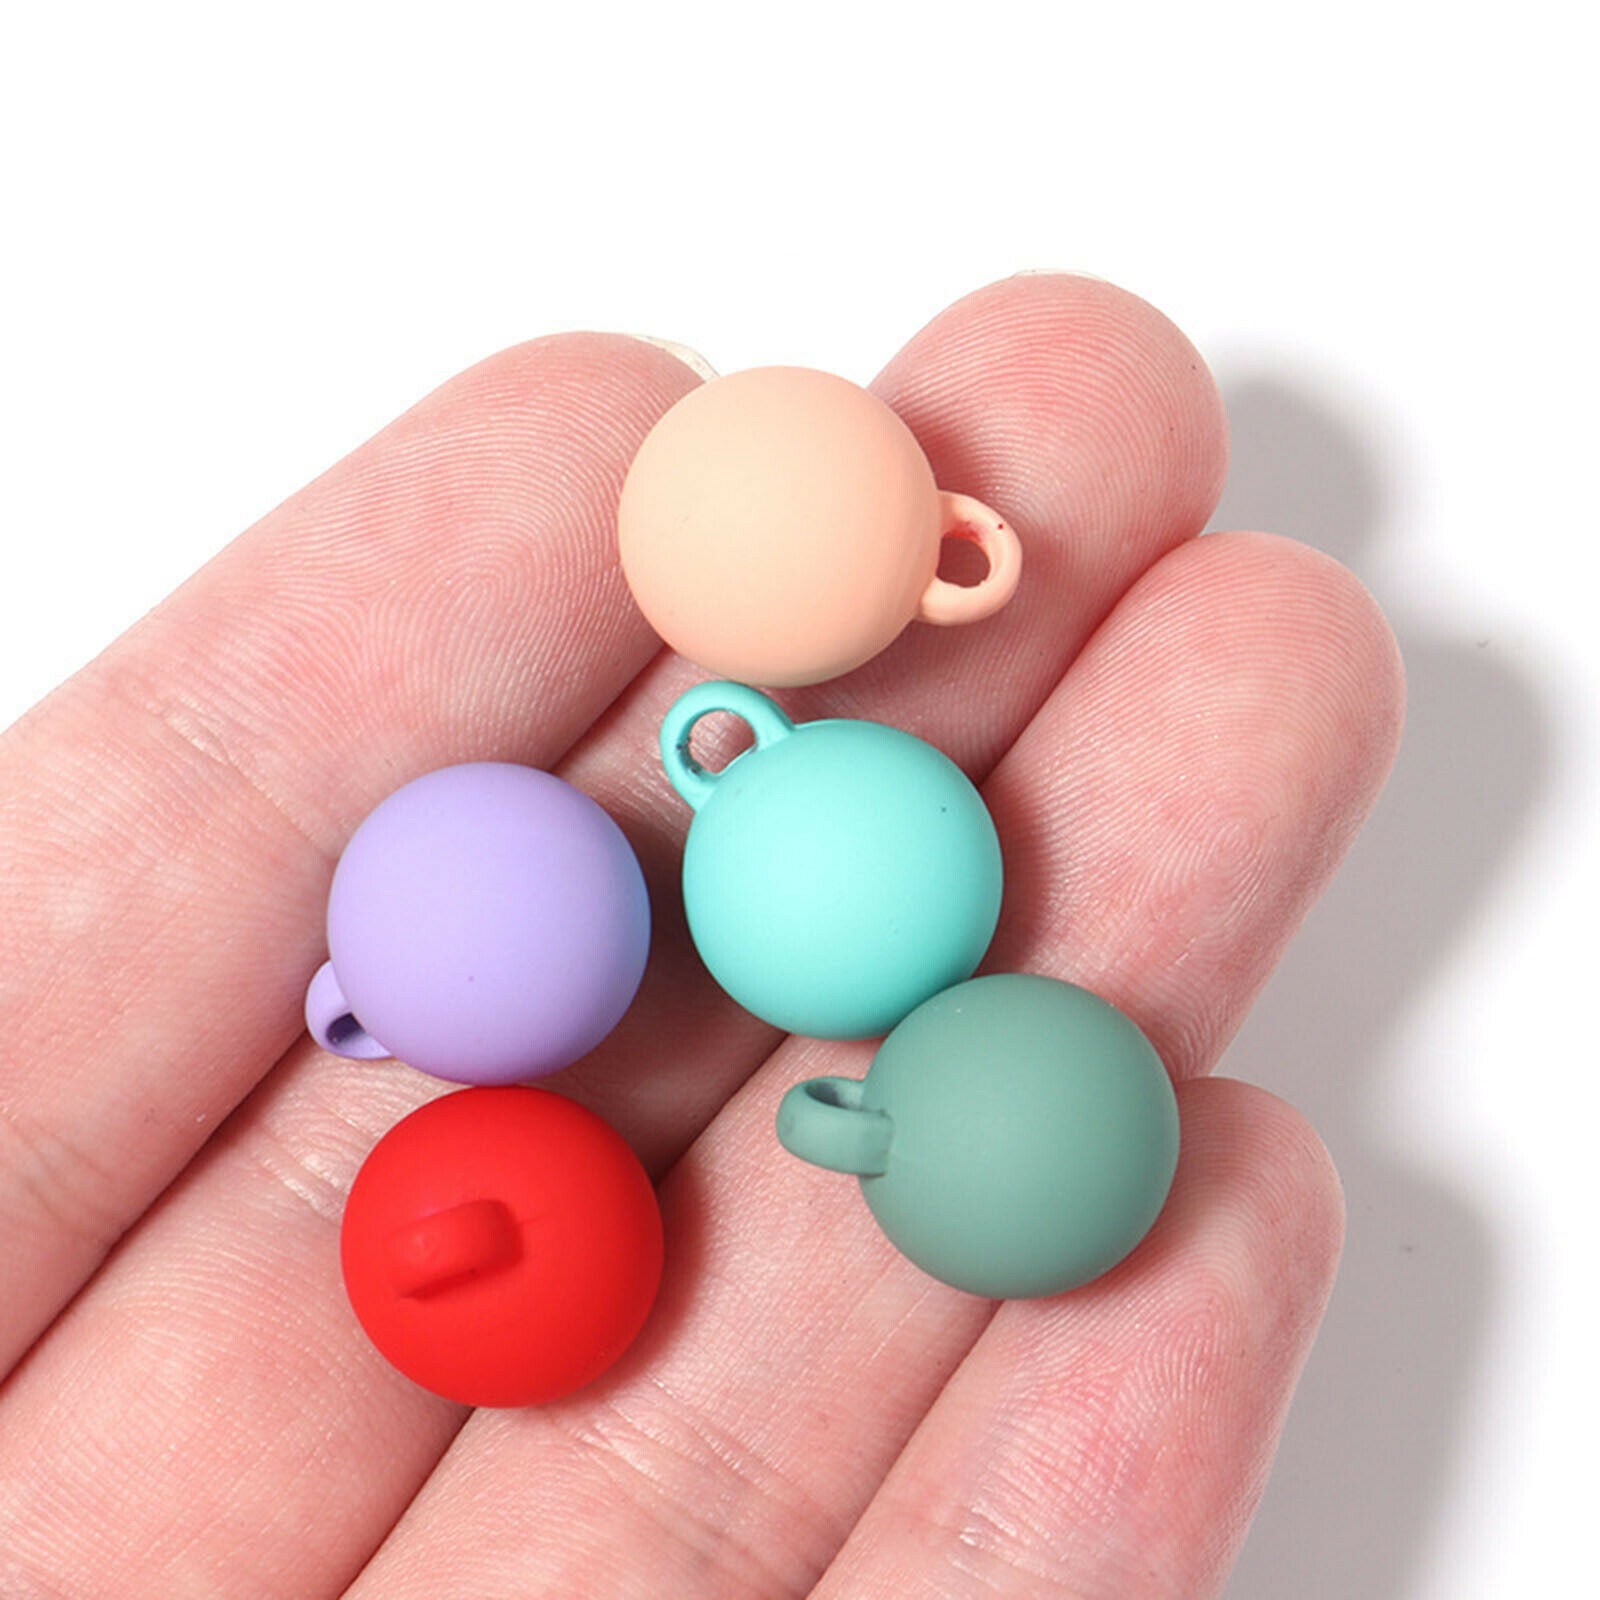 30 14mm Acrylic Colored Frosted Charms Pendants Beads for Jewelry Making Mix